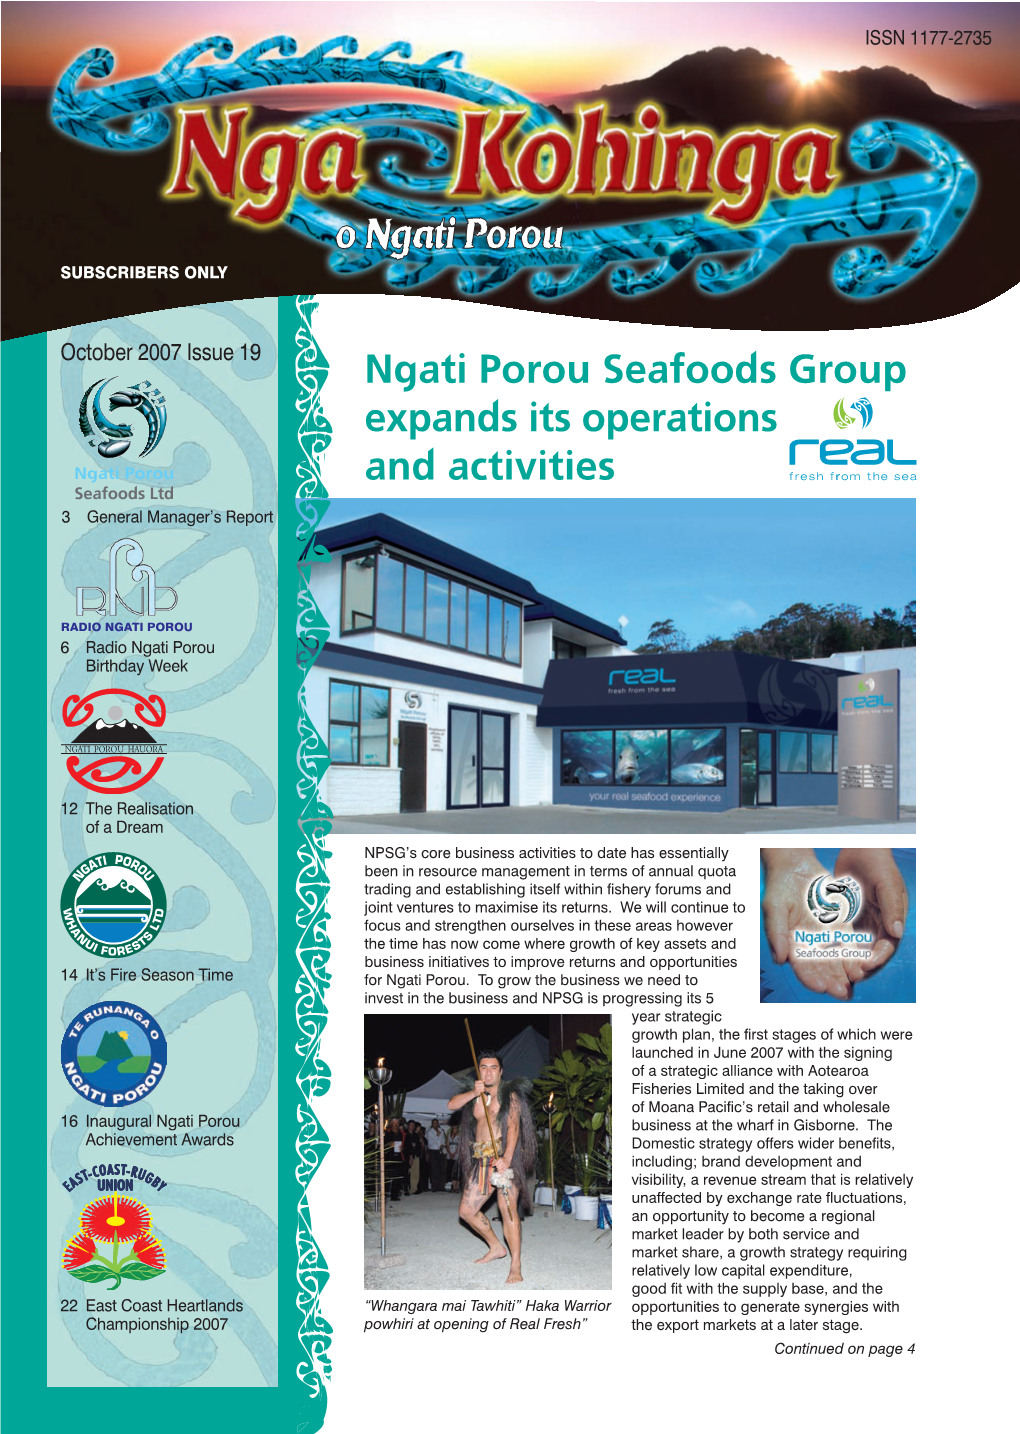 Ngati Porou Seafoods Group Expands Its Operations and Activities